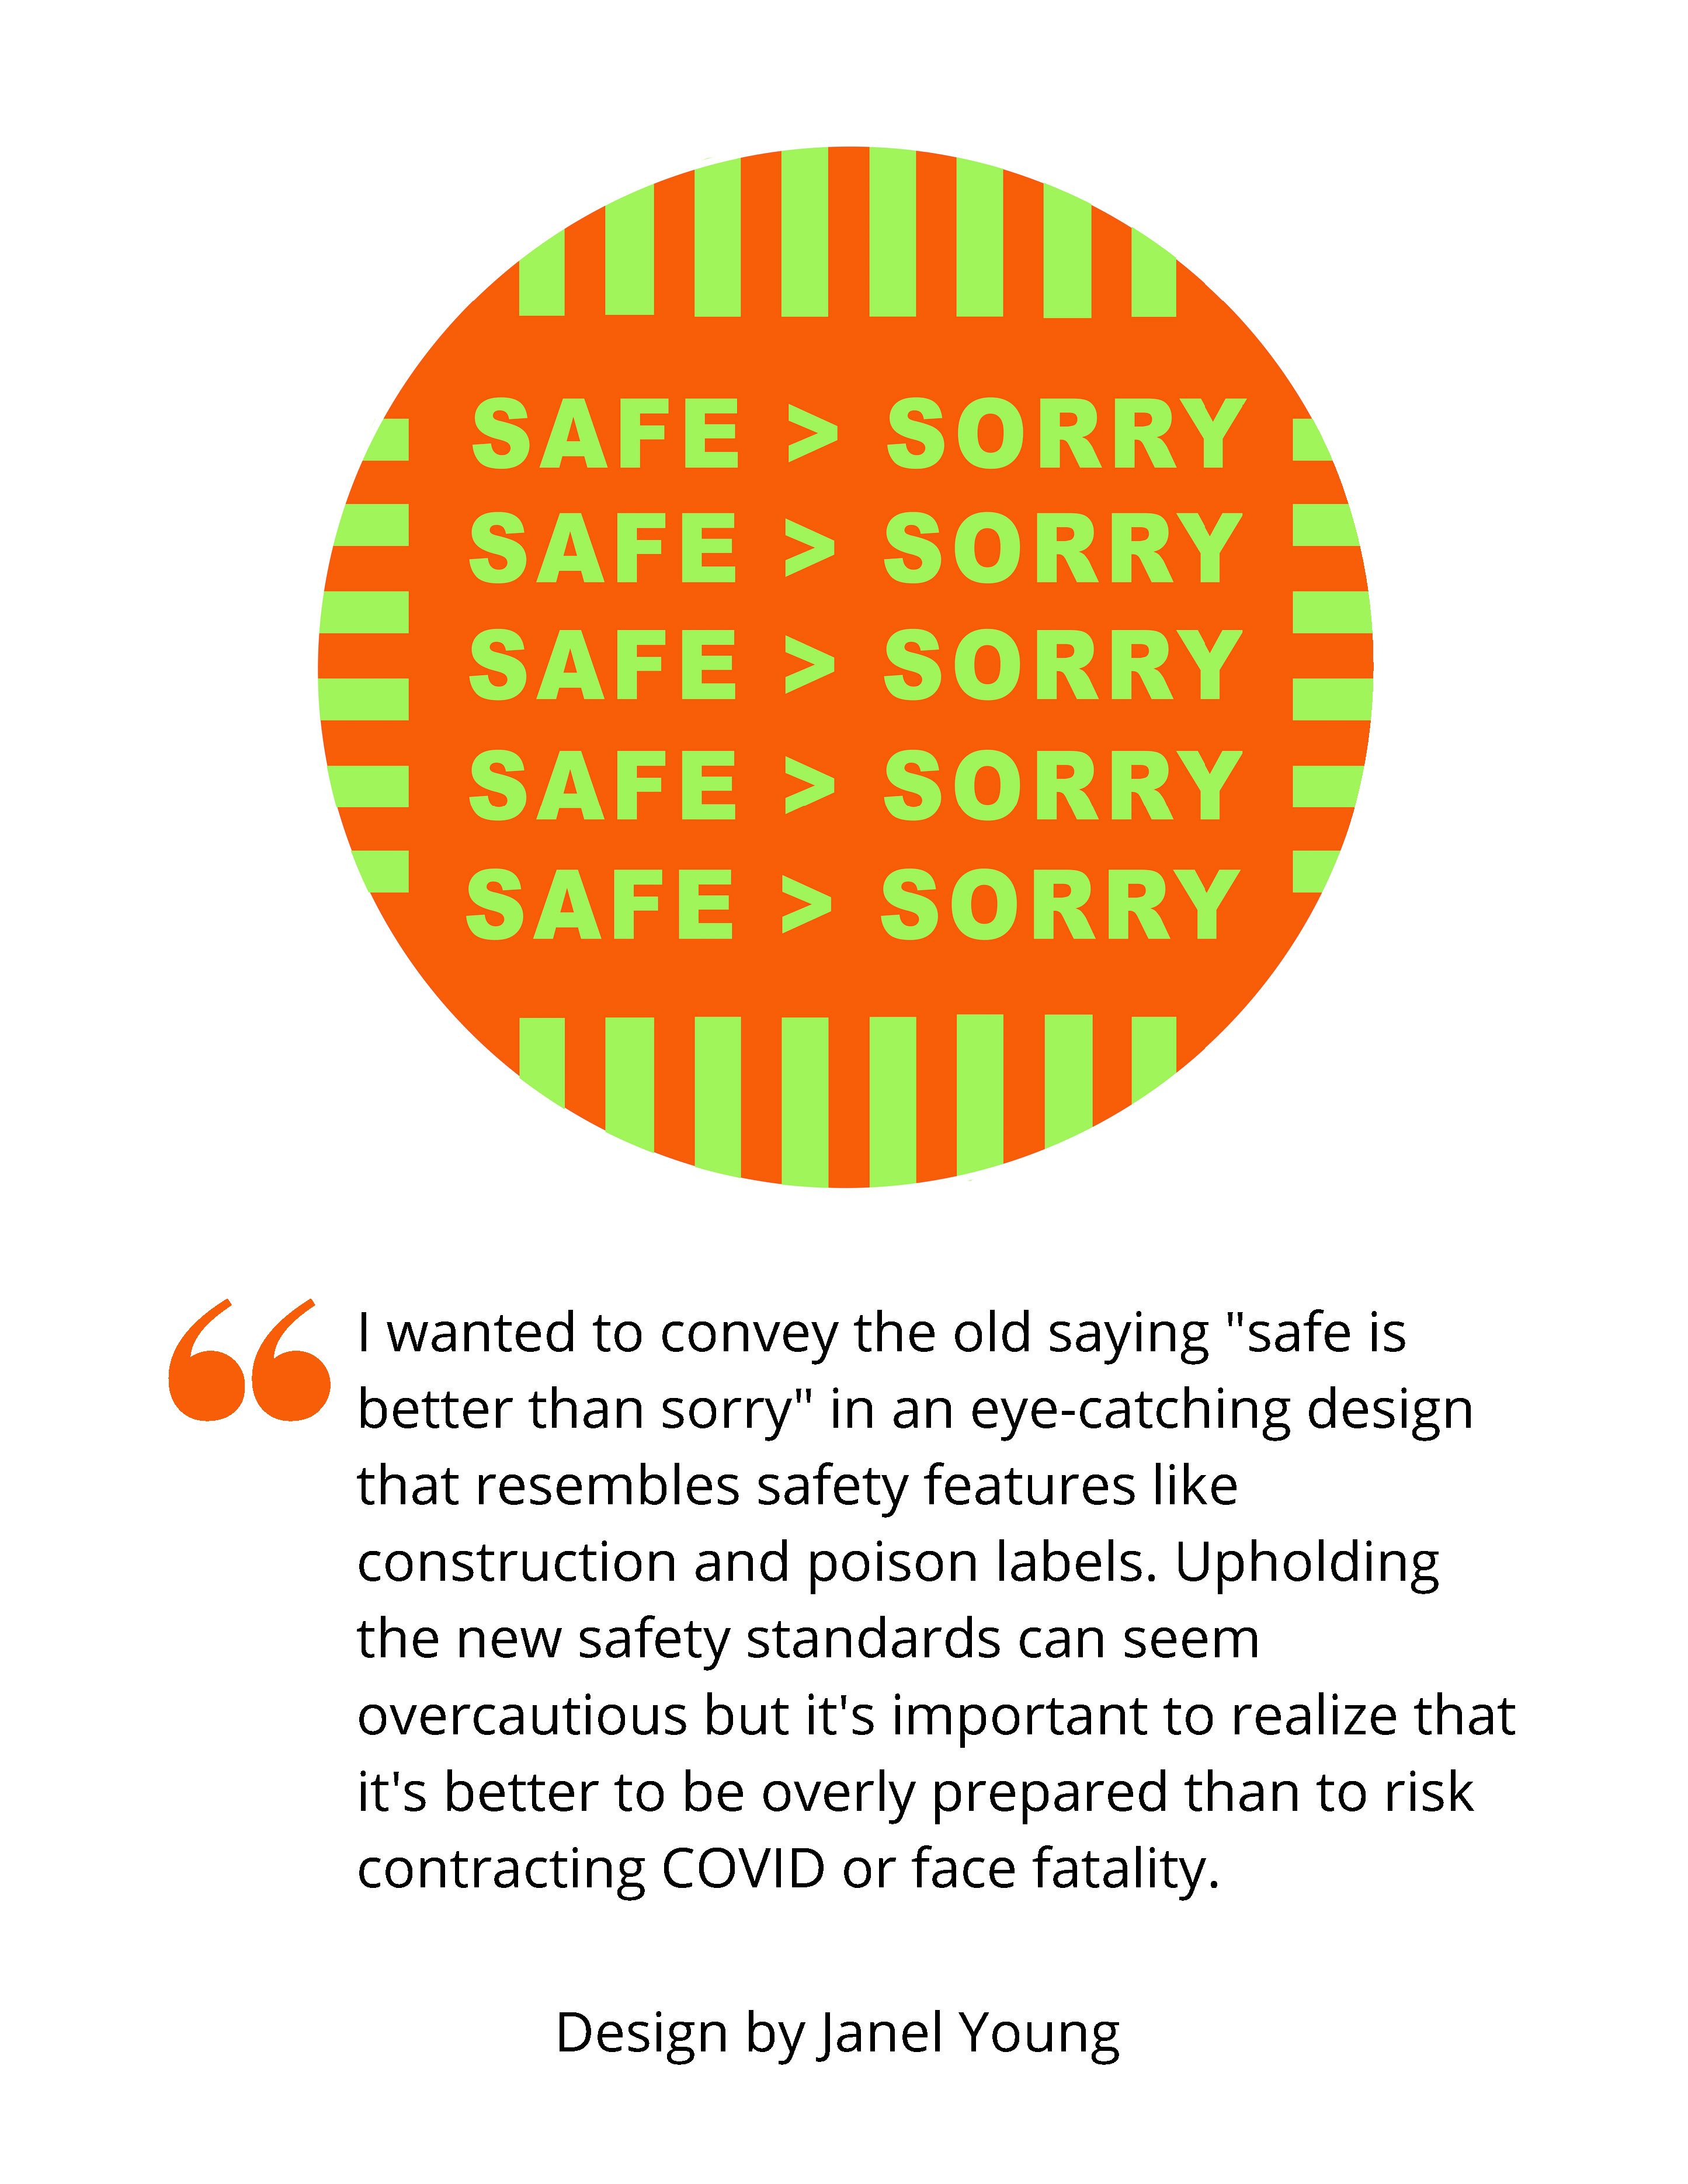 Image shows bright green text with the words "Safe > Sorry" over an orange background